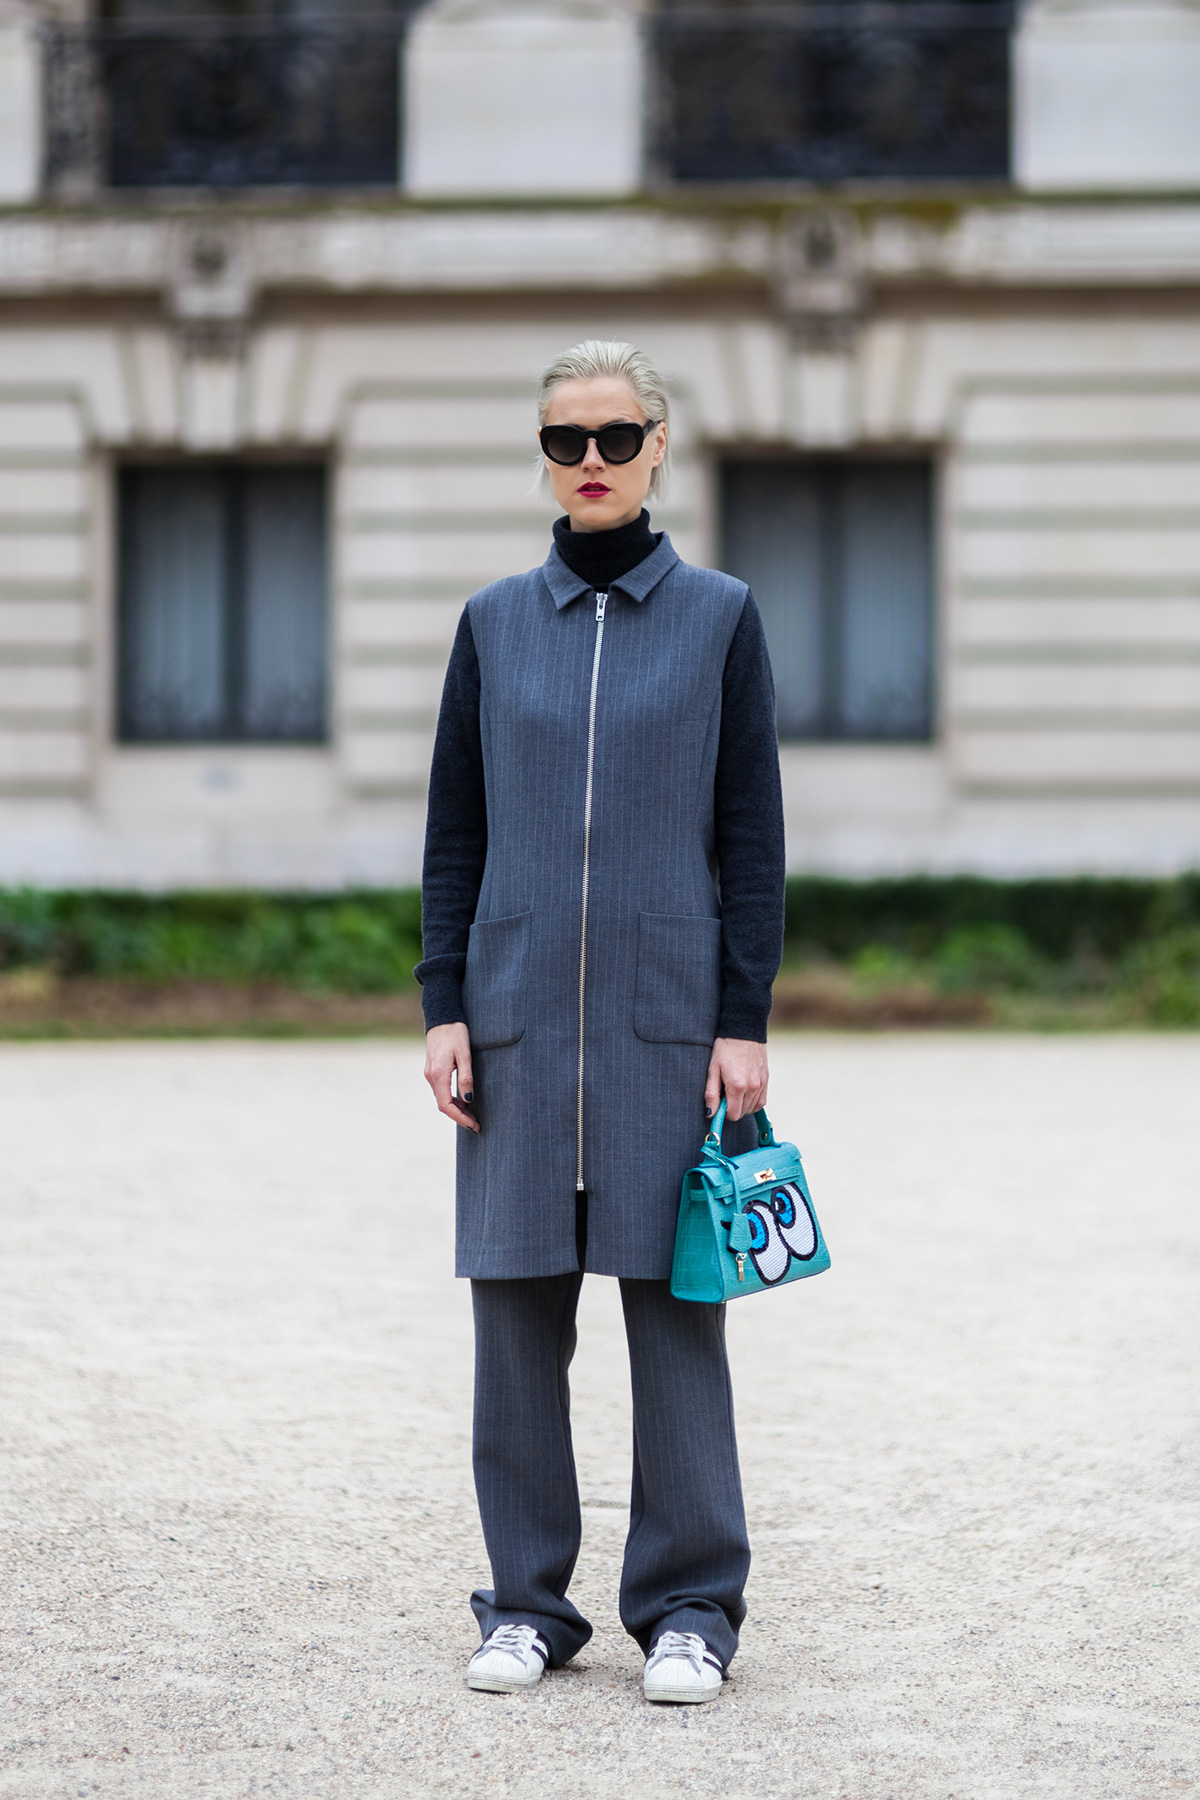 Linda Tol wearing a Ganni suit, Play no More bag and Adidas superstar sneakers before the Chanel Fall/Winter 2015-2016 fashion show at the Grand Palais in Paris, France